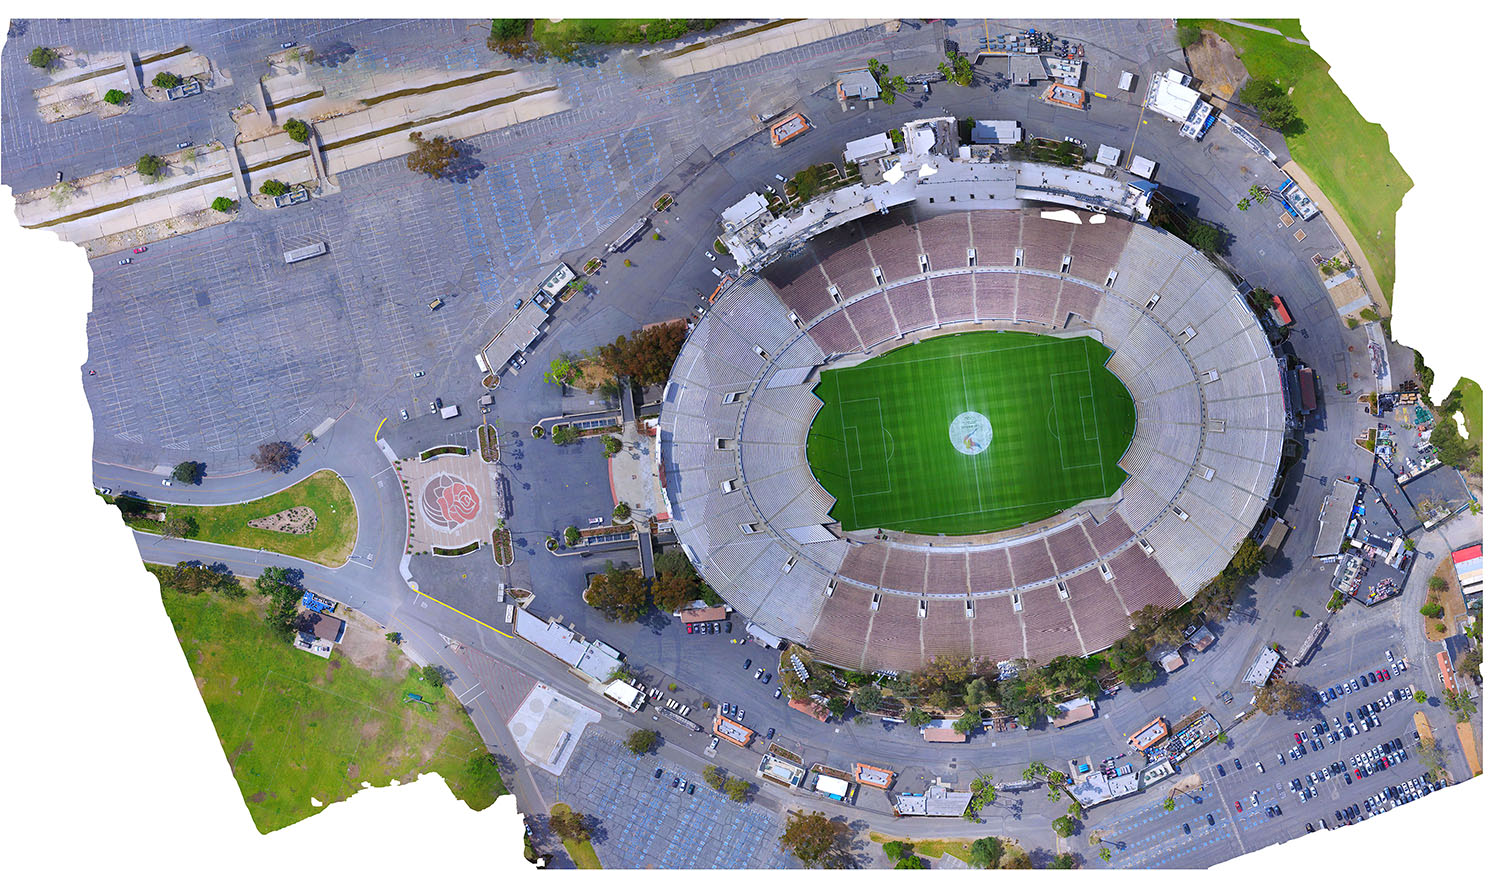 Aerial Maps Geospatial Data mission Aerial Data Collection Drone Mapping & Geospatial Data of the rose bowl Orthmosaic 2D Map Scan Area 40 Acres Drone Altitude 175 Ft Number of photos 350